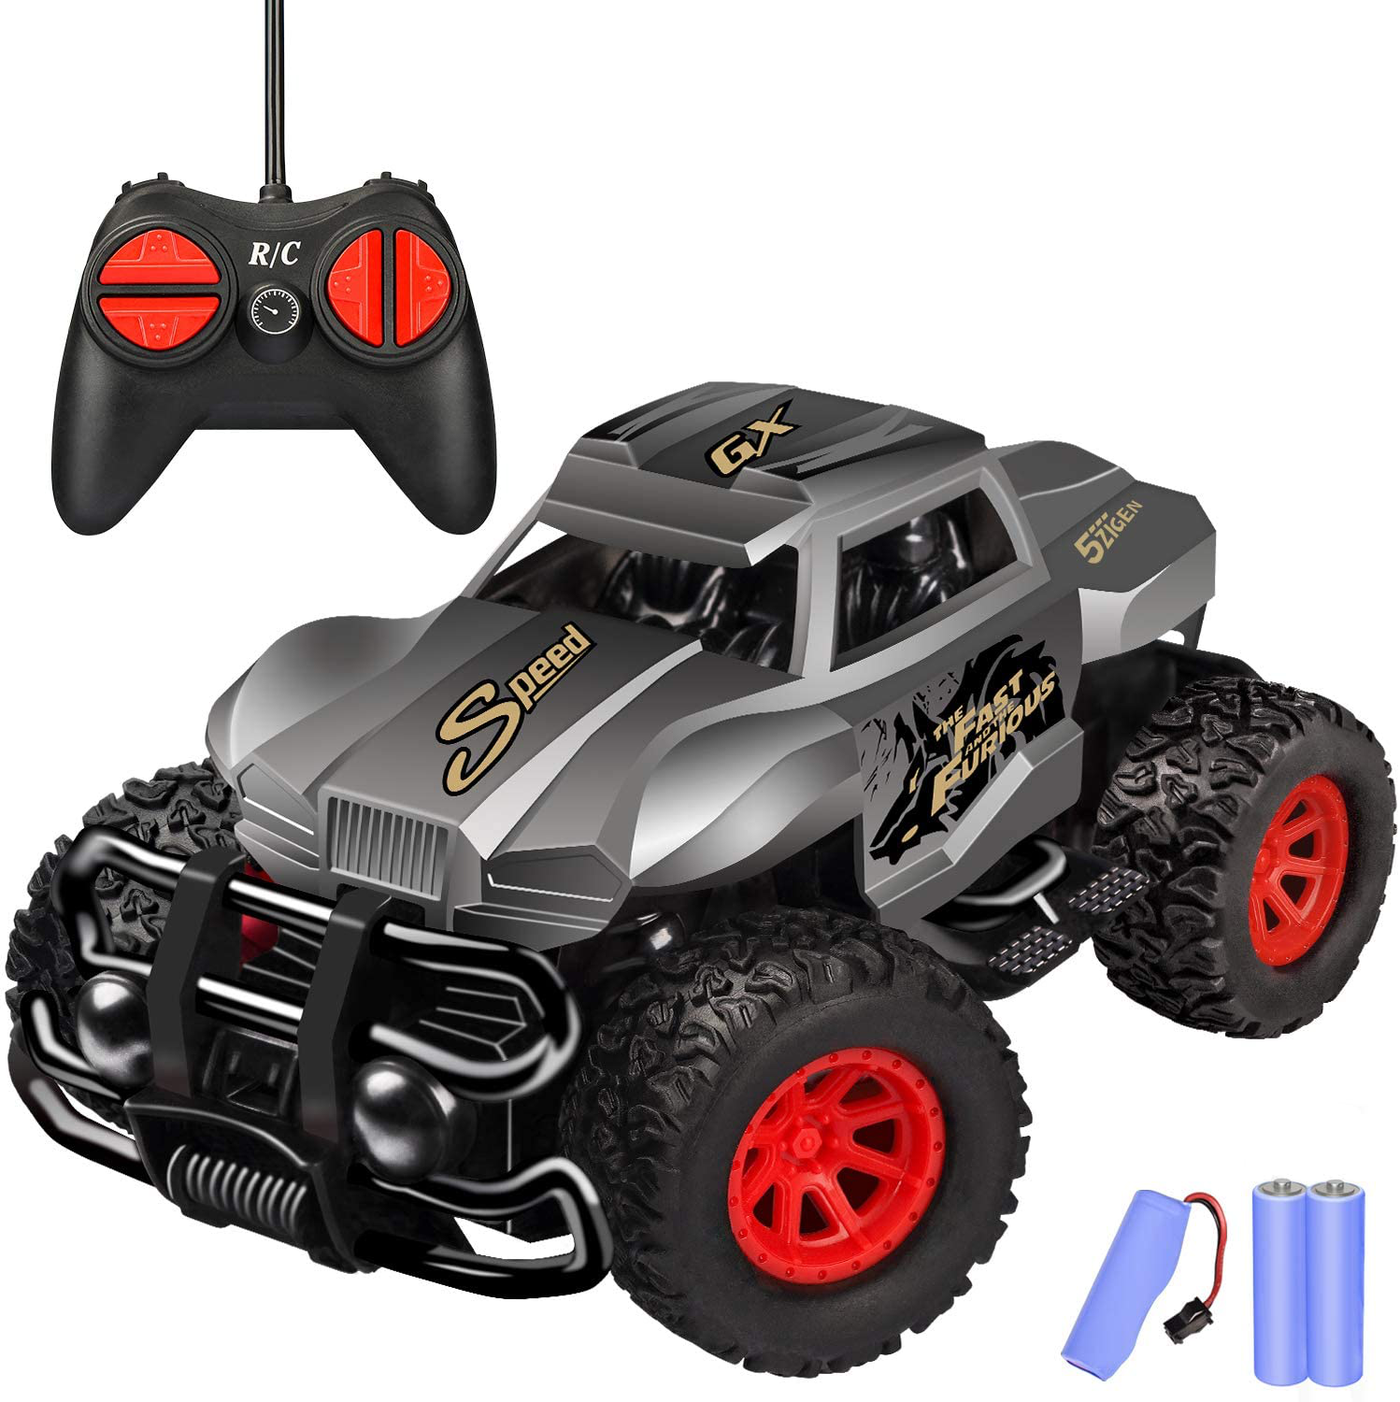 GaHoo Remote Control Car for Kids - Durable Non-Slip Off-Road Shockproof RC Racing Car (Gray) RC Toys Car for Ages 3 4 5 6 7 8 Year Old Boys and Girls Best Gifts